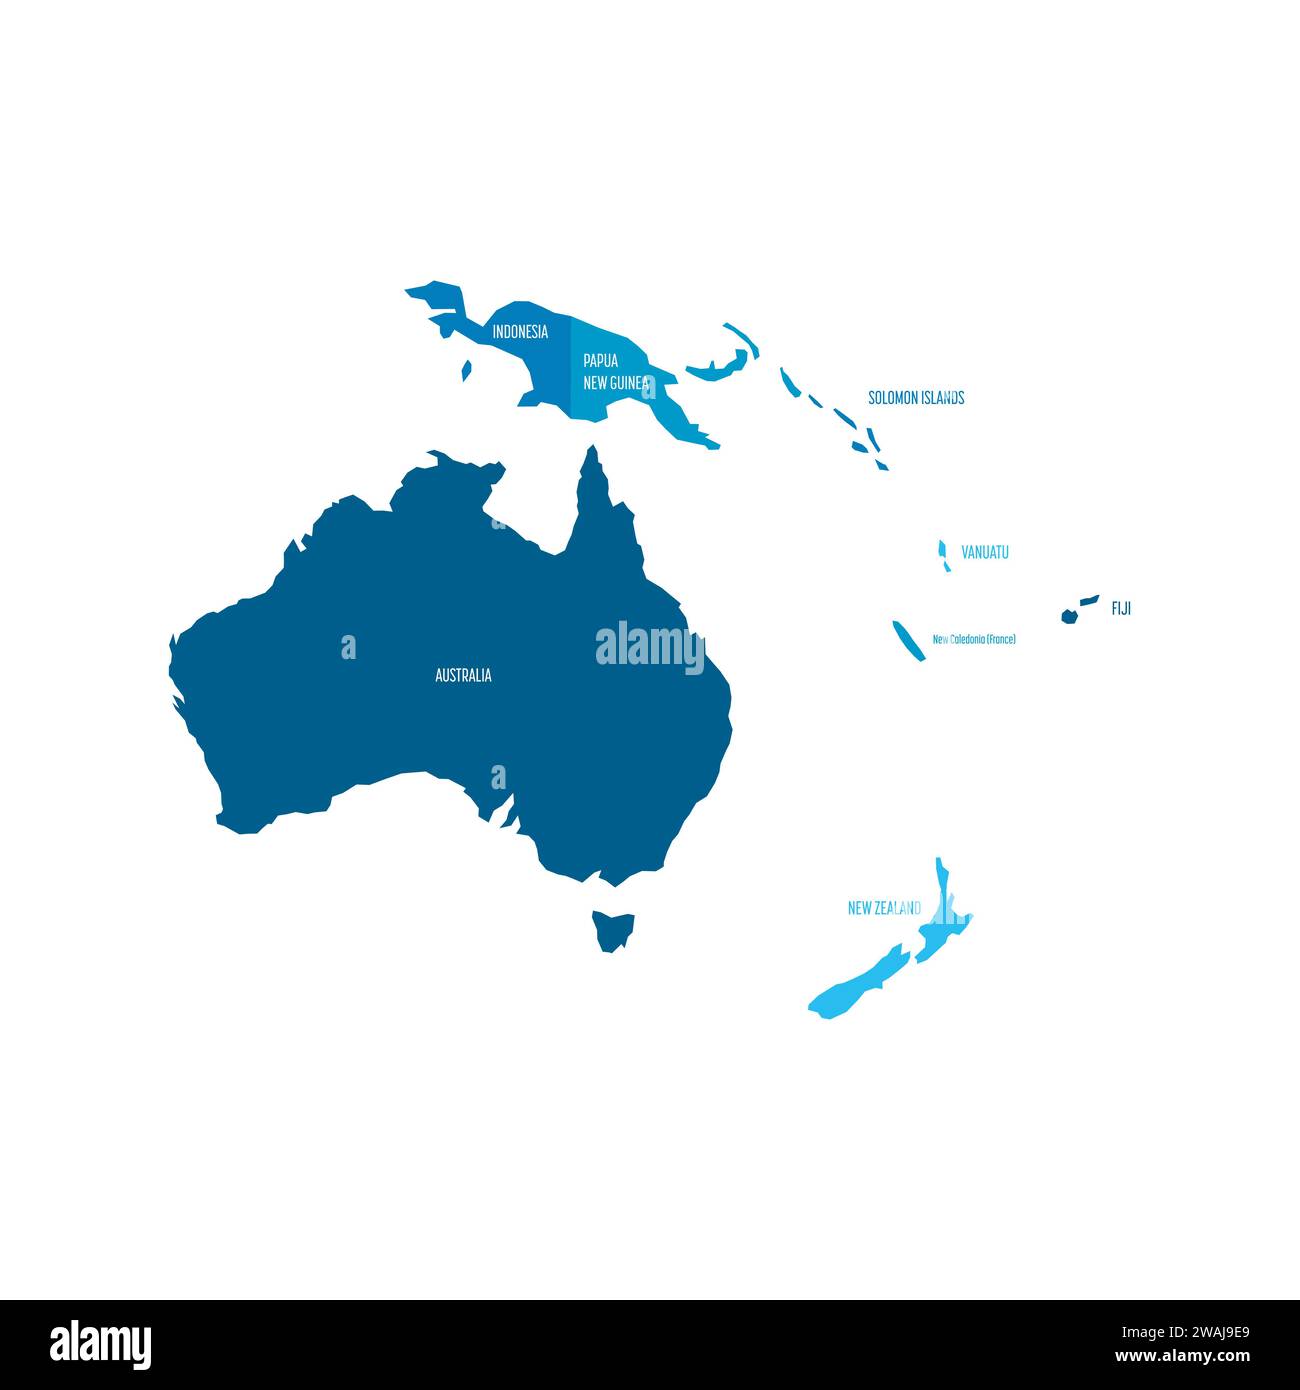 Political map of Australia. Blue colored land with country name labels ...